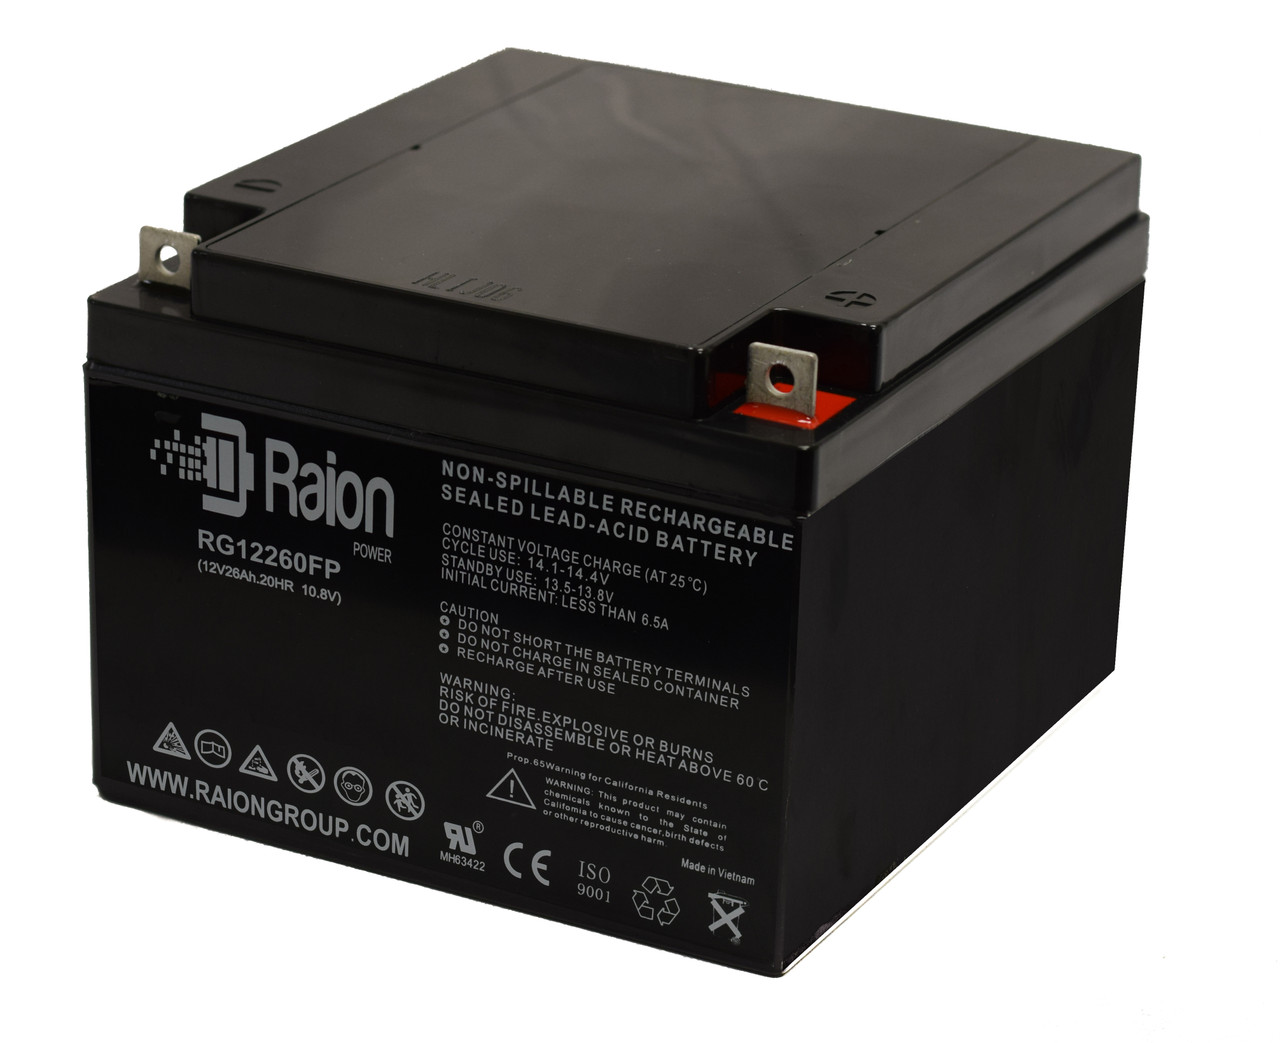 Raion Power Replacement 12V 26Ah Battery for Discover D12260 - 1 Pack